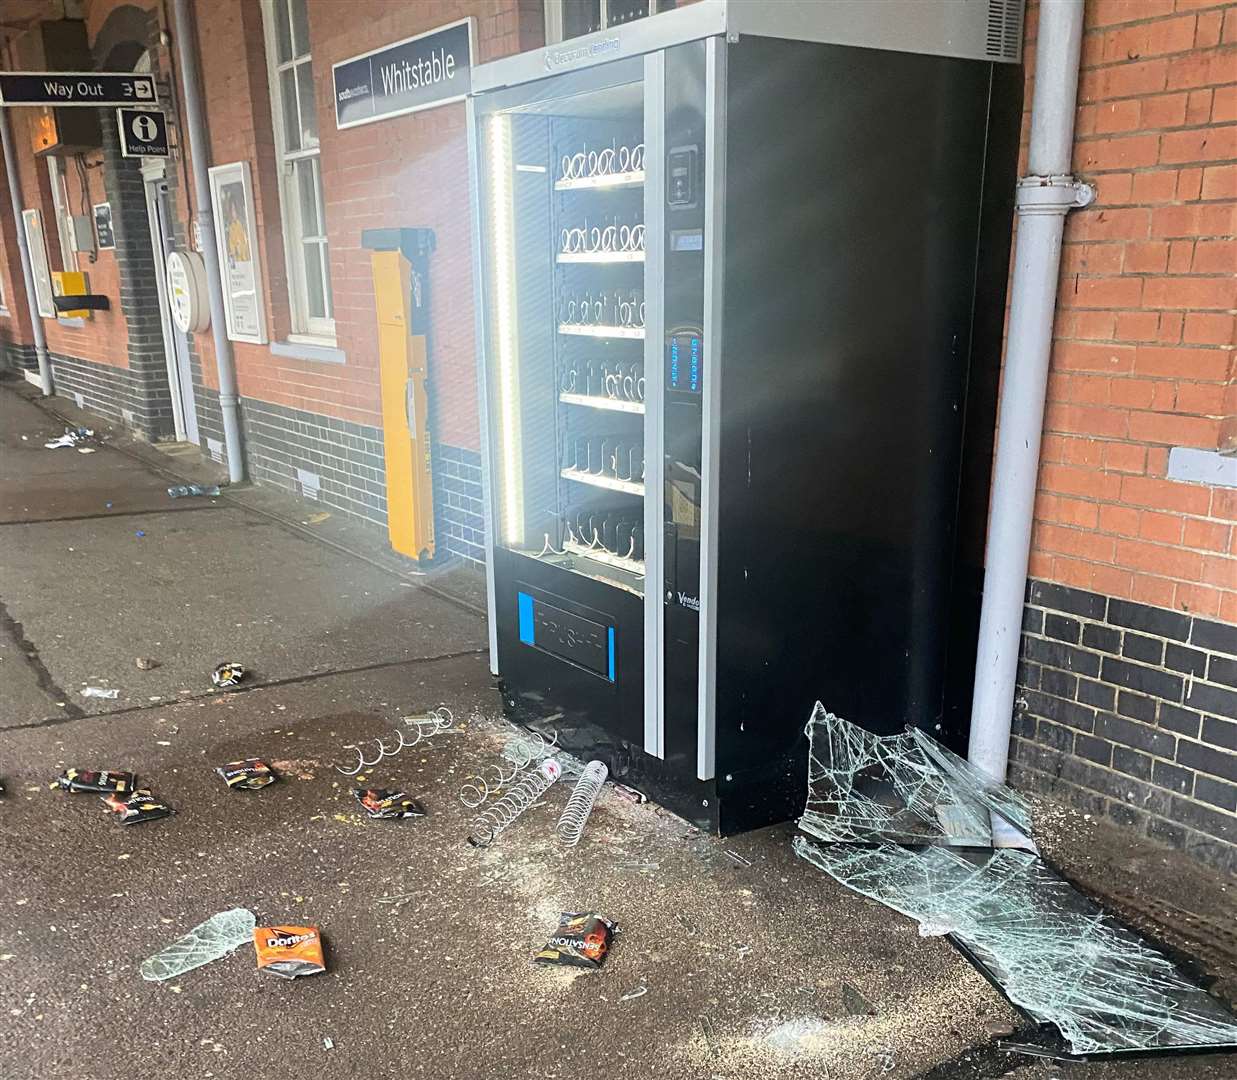 A vending machine was smashed at Whitstable train station. Picture: Lara Jane Martin